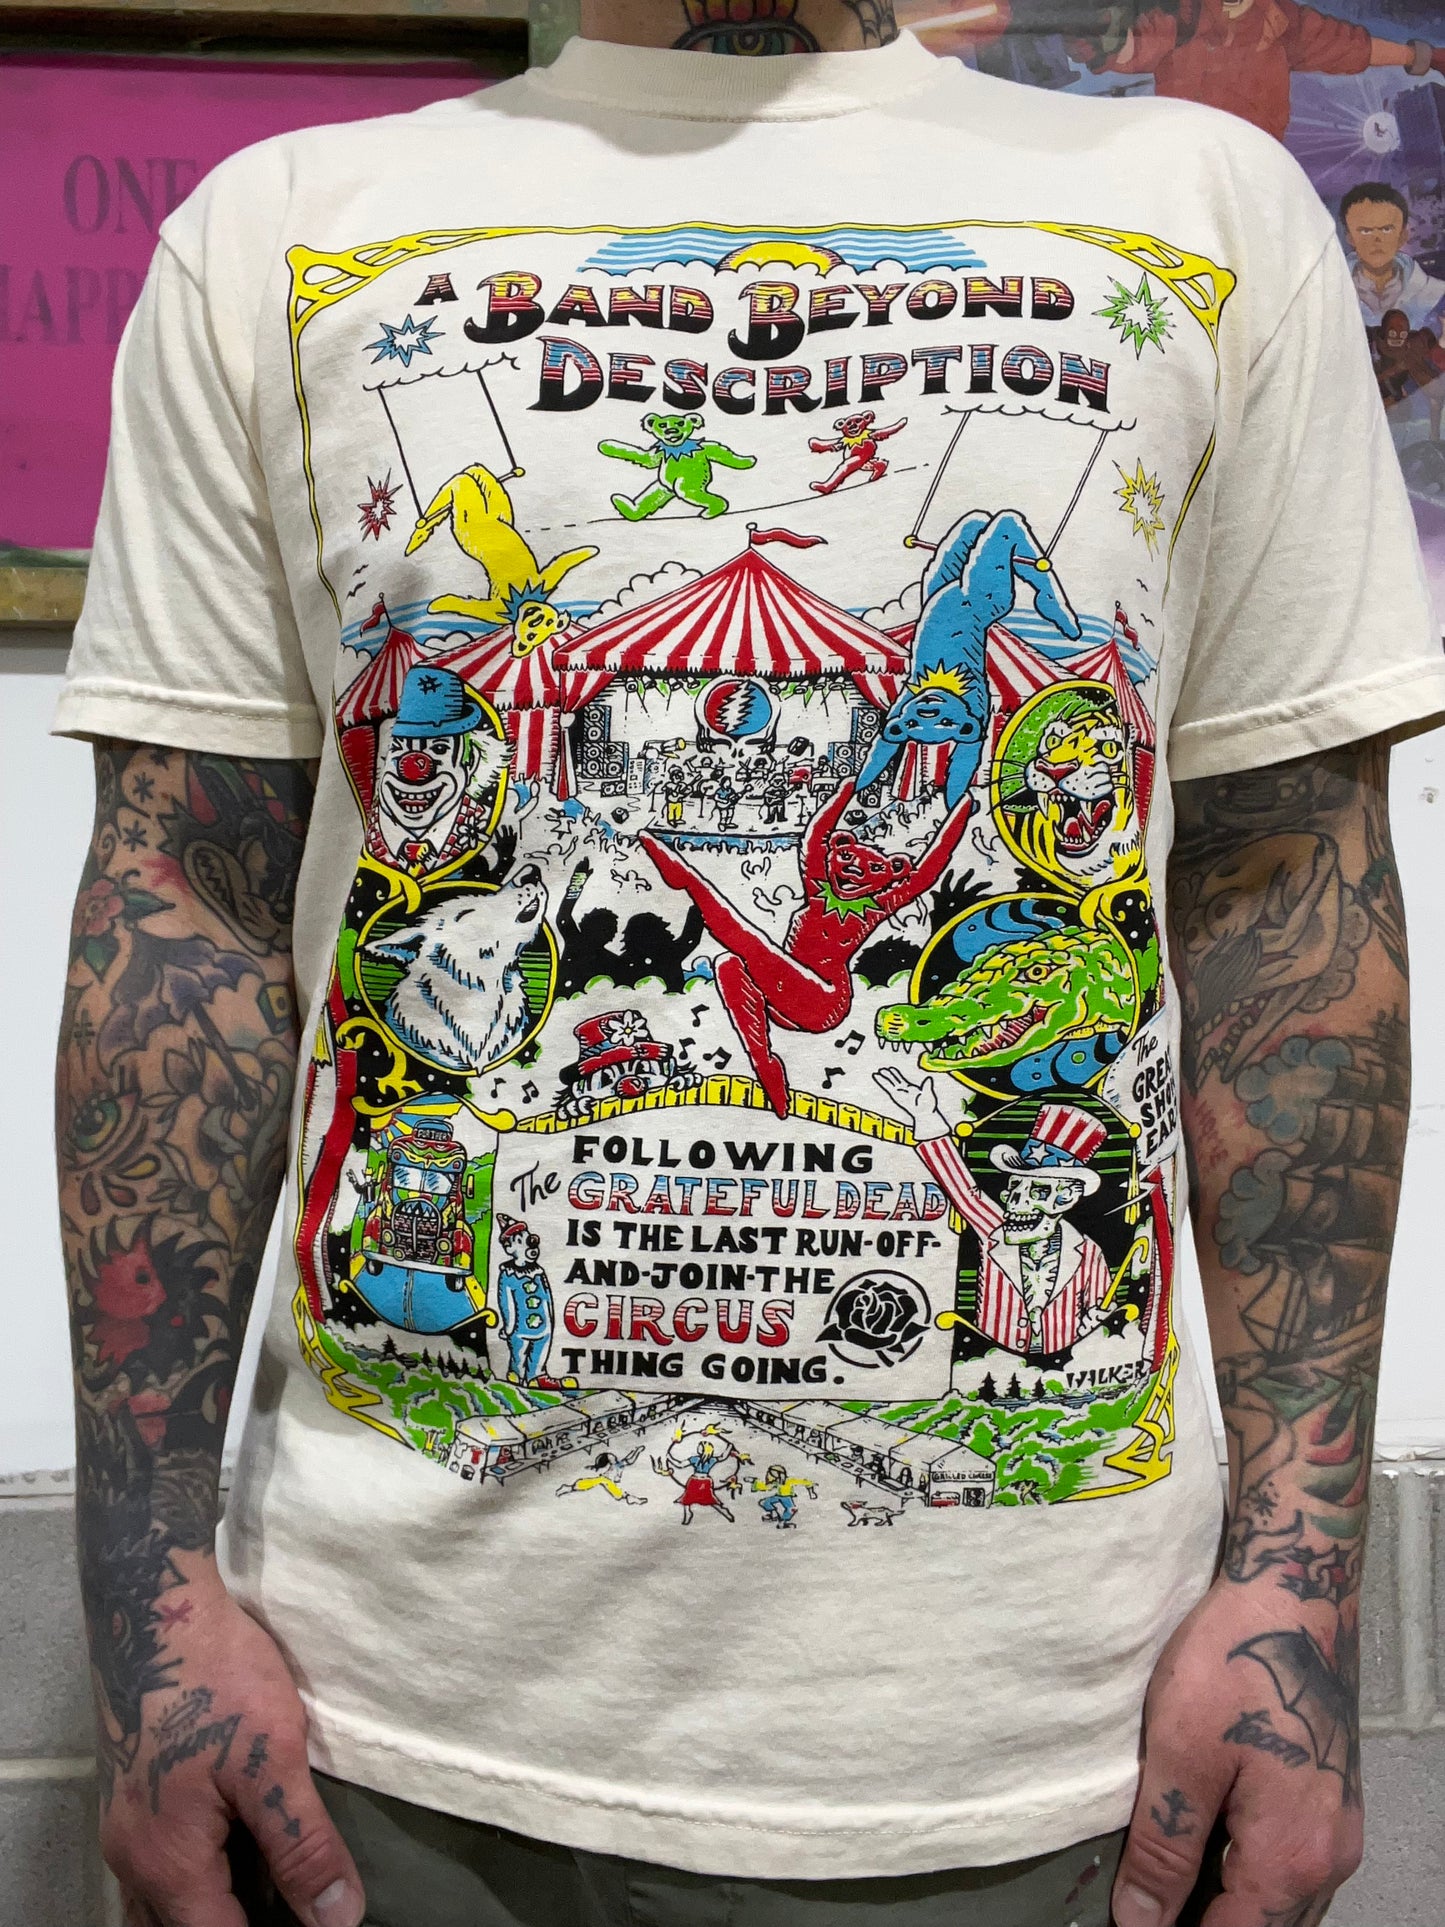 Run-Off-And-Join-The-Circus T-Shirt